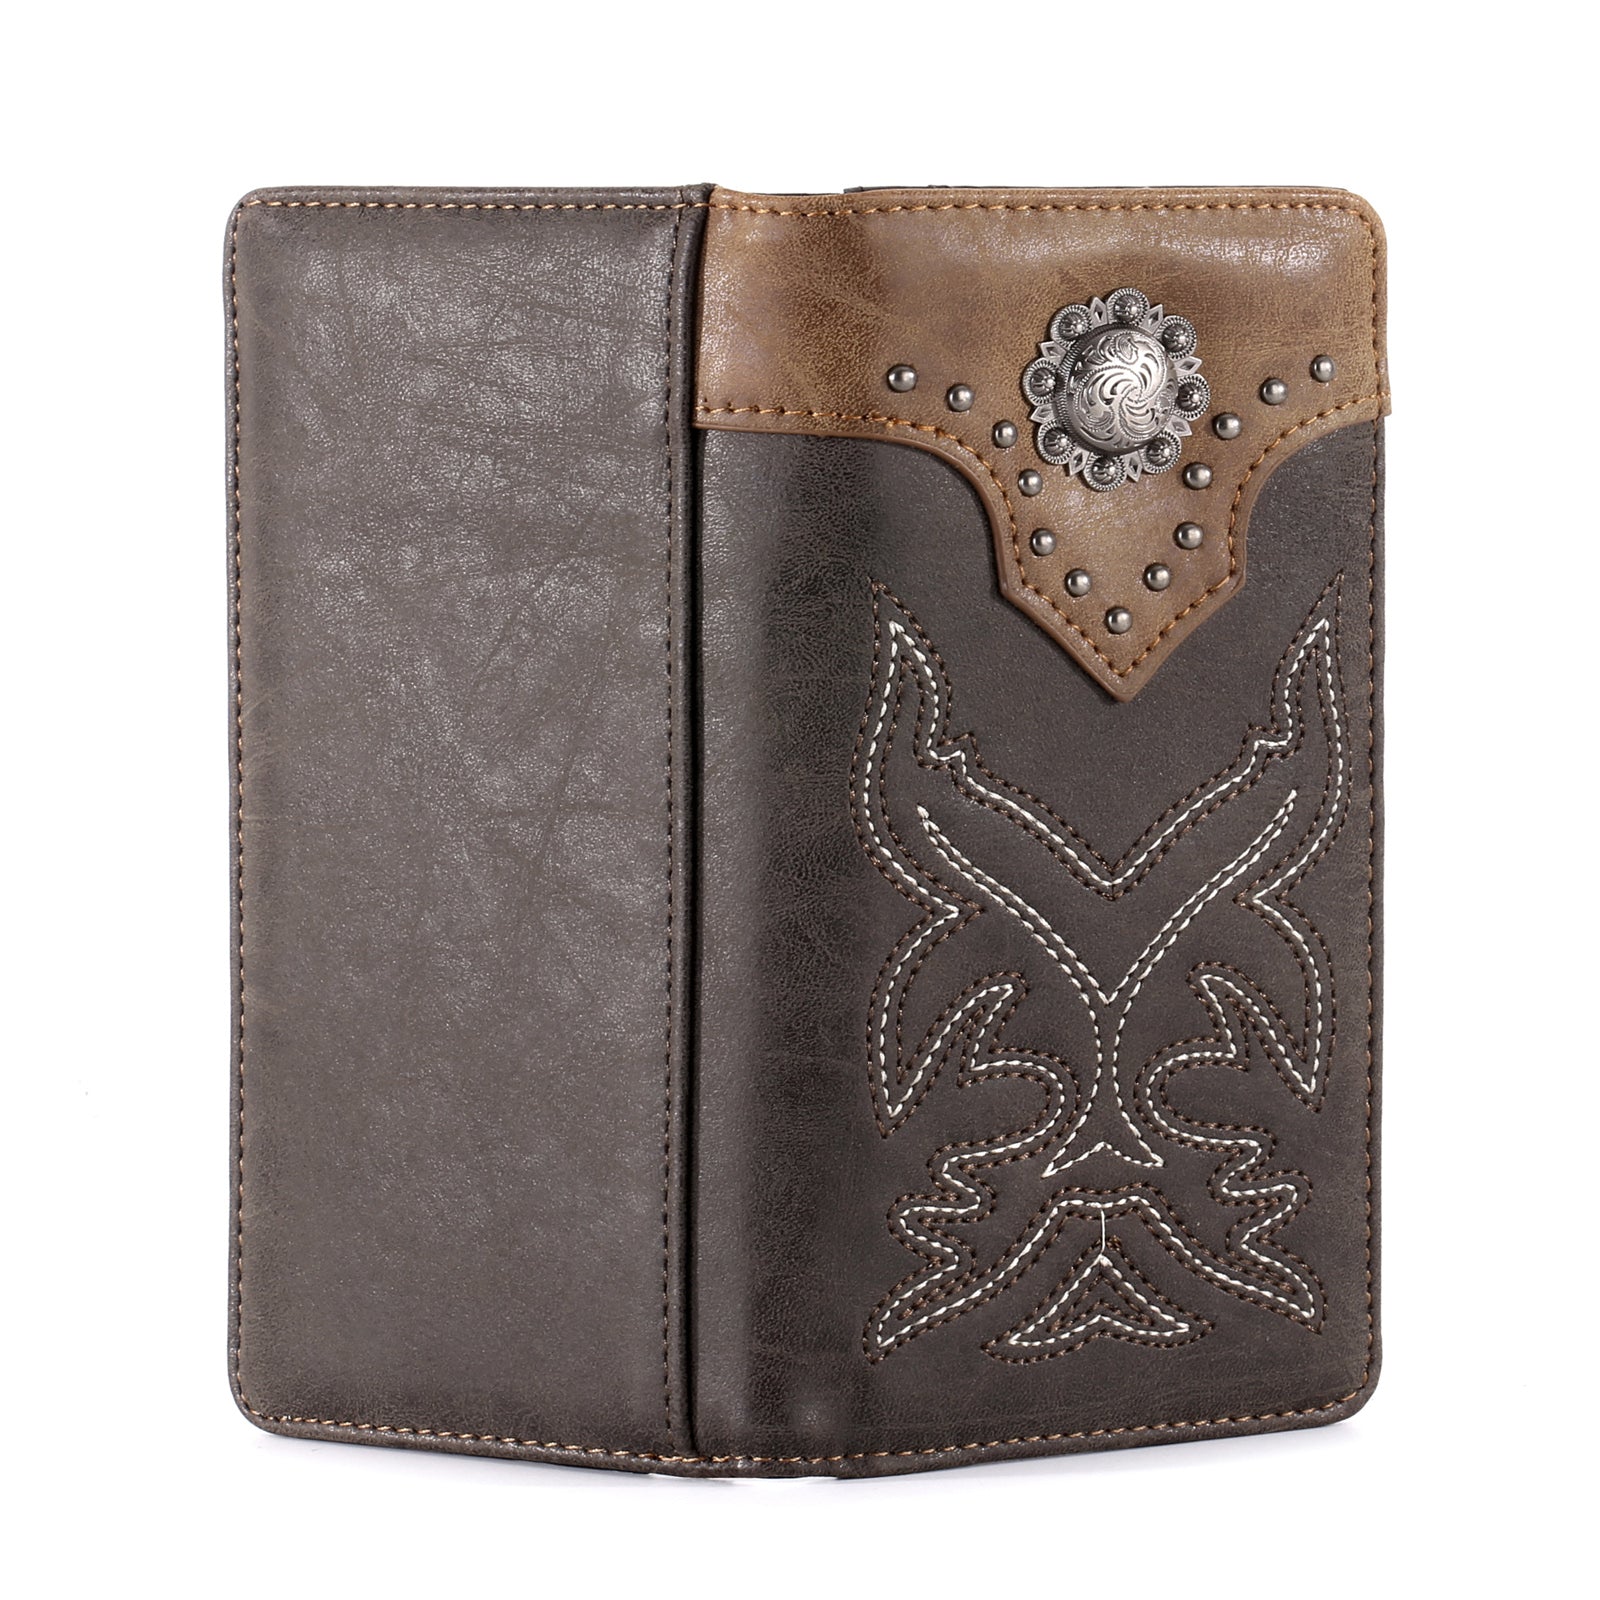 Embroidered Boot Scroll Men's Bifold Long PU Leather Wallet - Cowgirl Wear